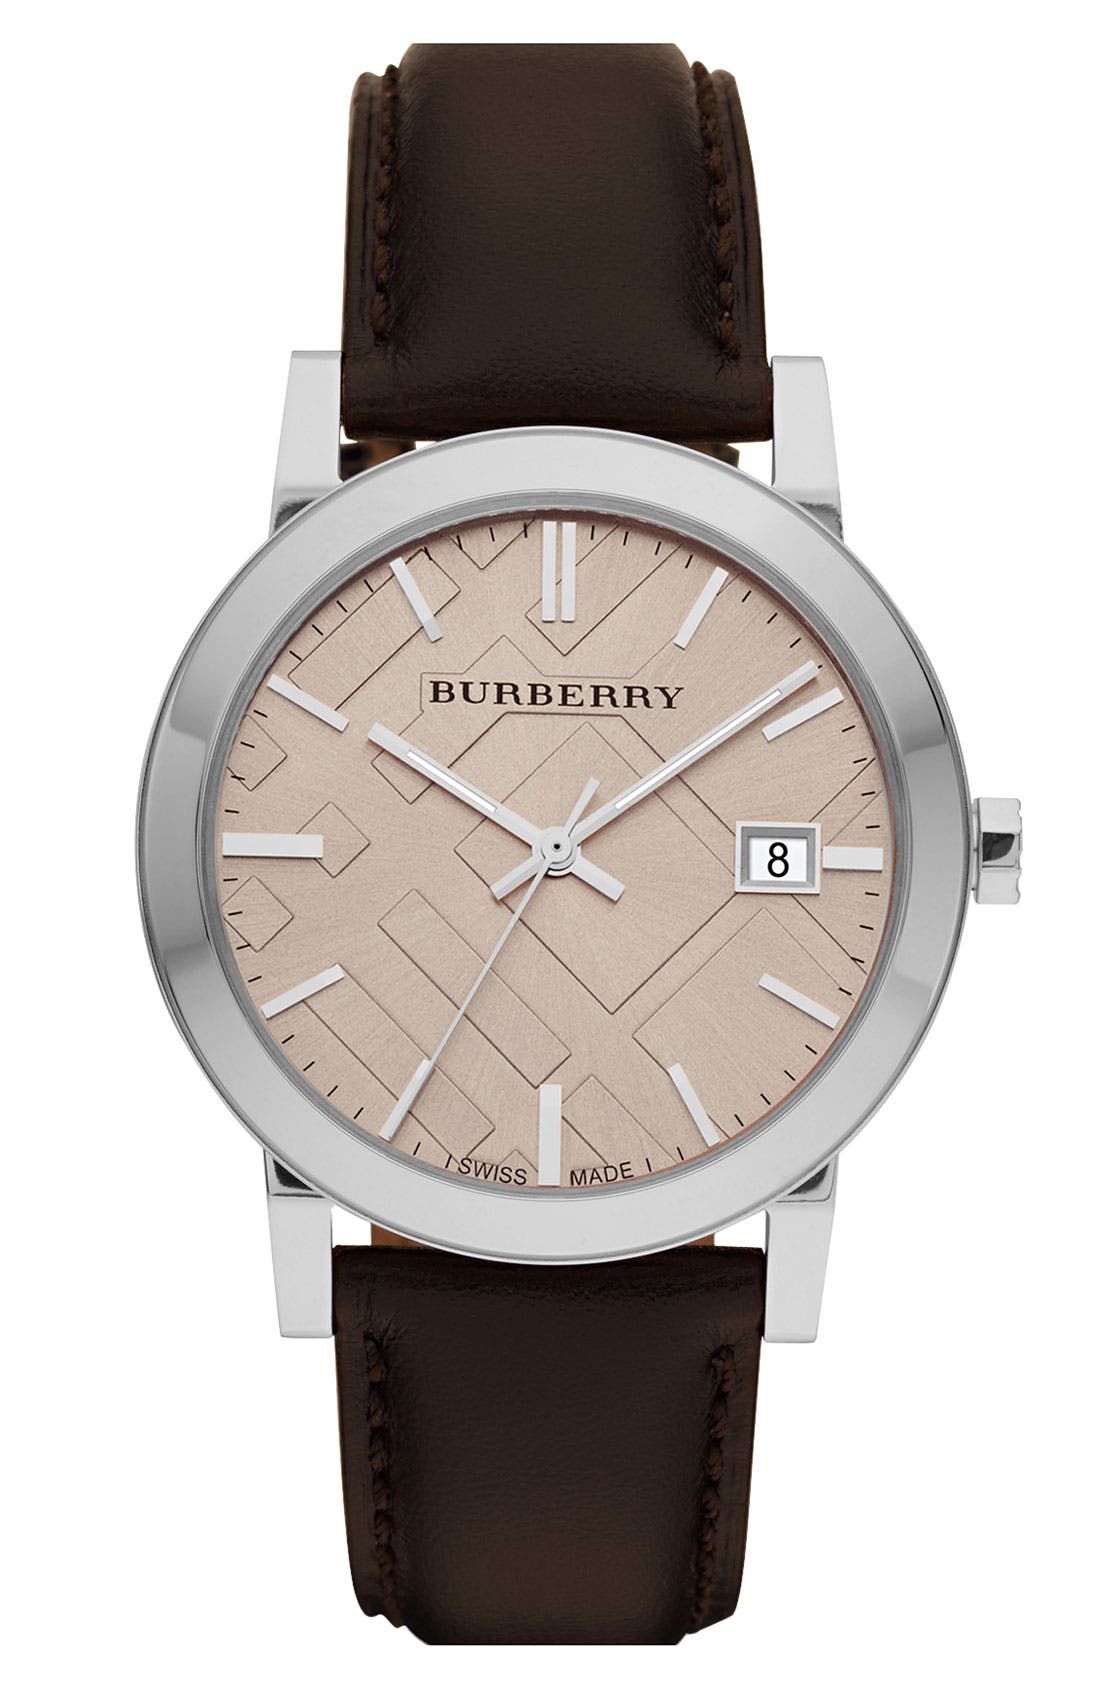 burberry large check stamped bracelet watch